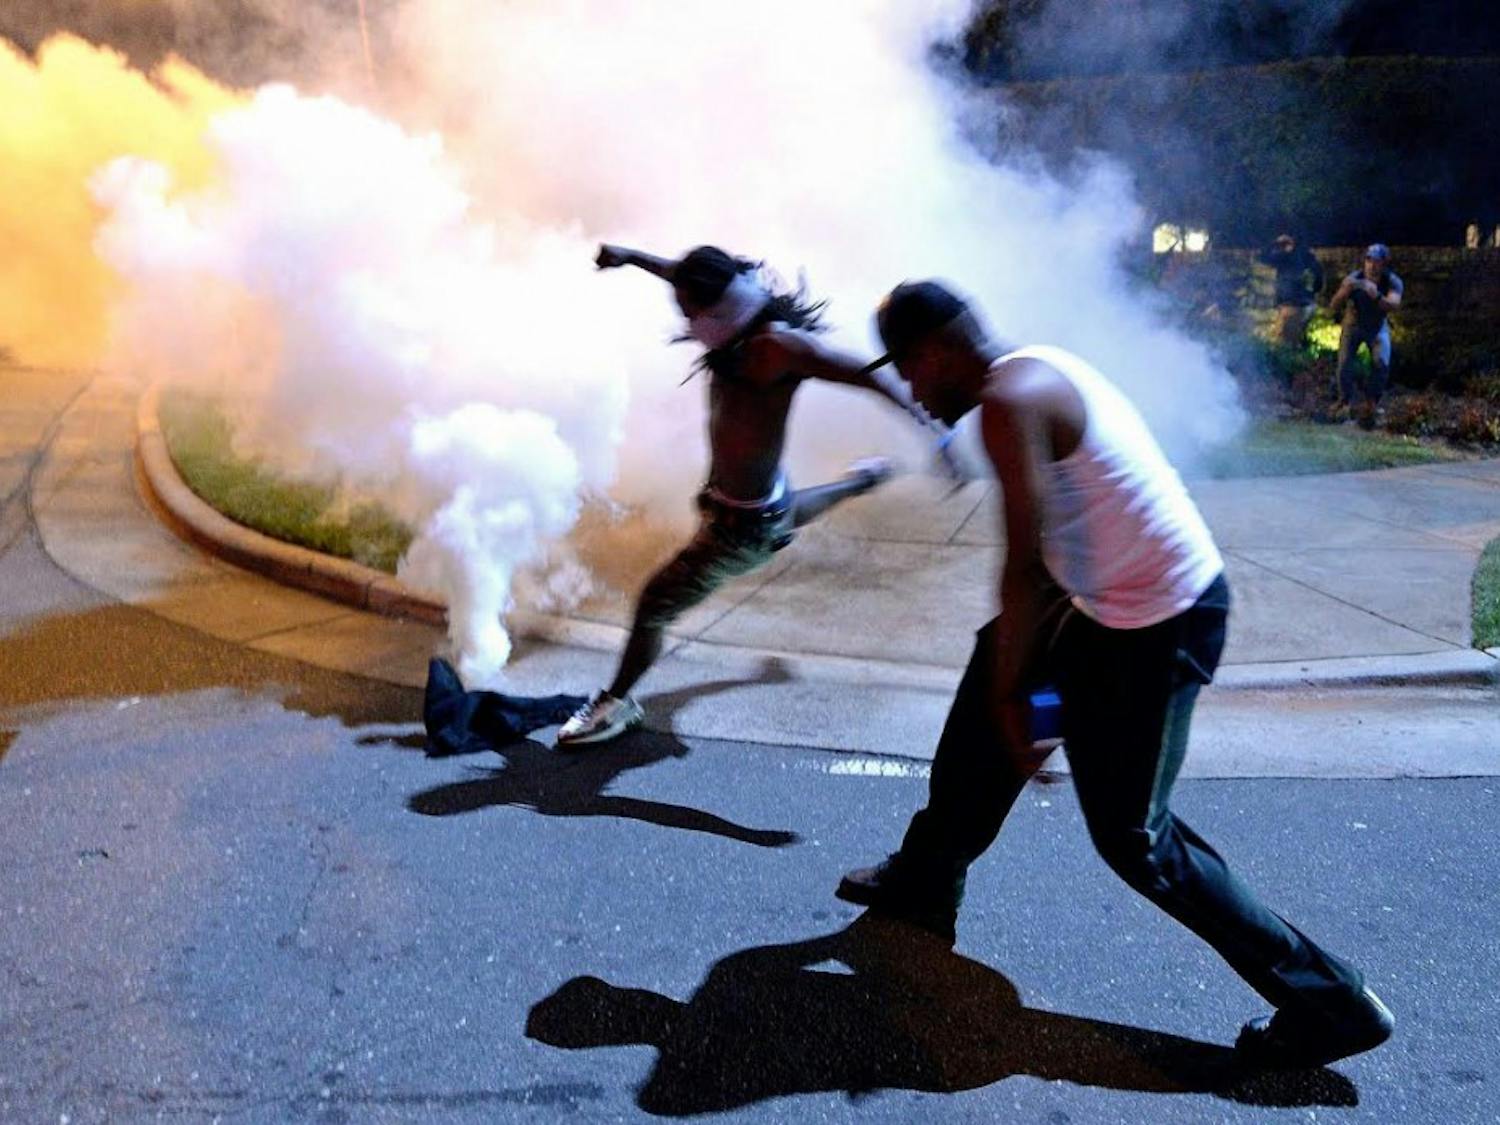 A protestor kicks a tear gas canister fired by Charlotte-Mecklenburg police officers along Old Concord Rd. in Charlotte, NC on Tuesday night. A protest began on Old Concord Road at Bonnie Lane, where a Charlotte-Mecklenburg police officer fatally shot a man in the parking lot of The Village at College Downs apartment complex Tuesday afternoon.The man who died was identified late Tuesday as Keith Scott, 43 and the officer who fired the fatal shot was CMPD Officer Brentley Vinson.